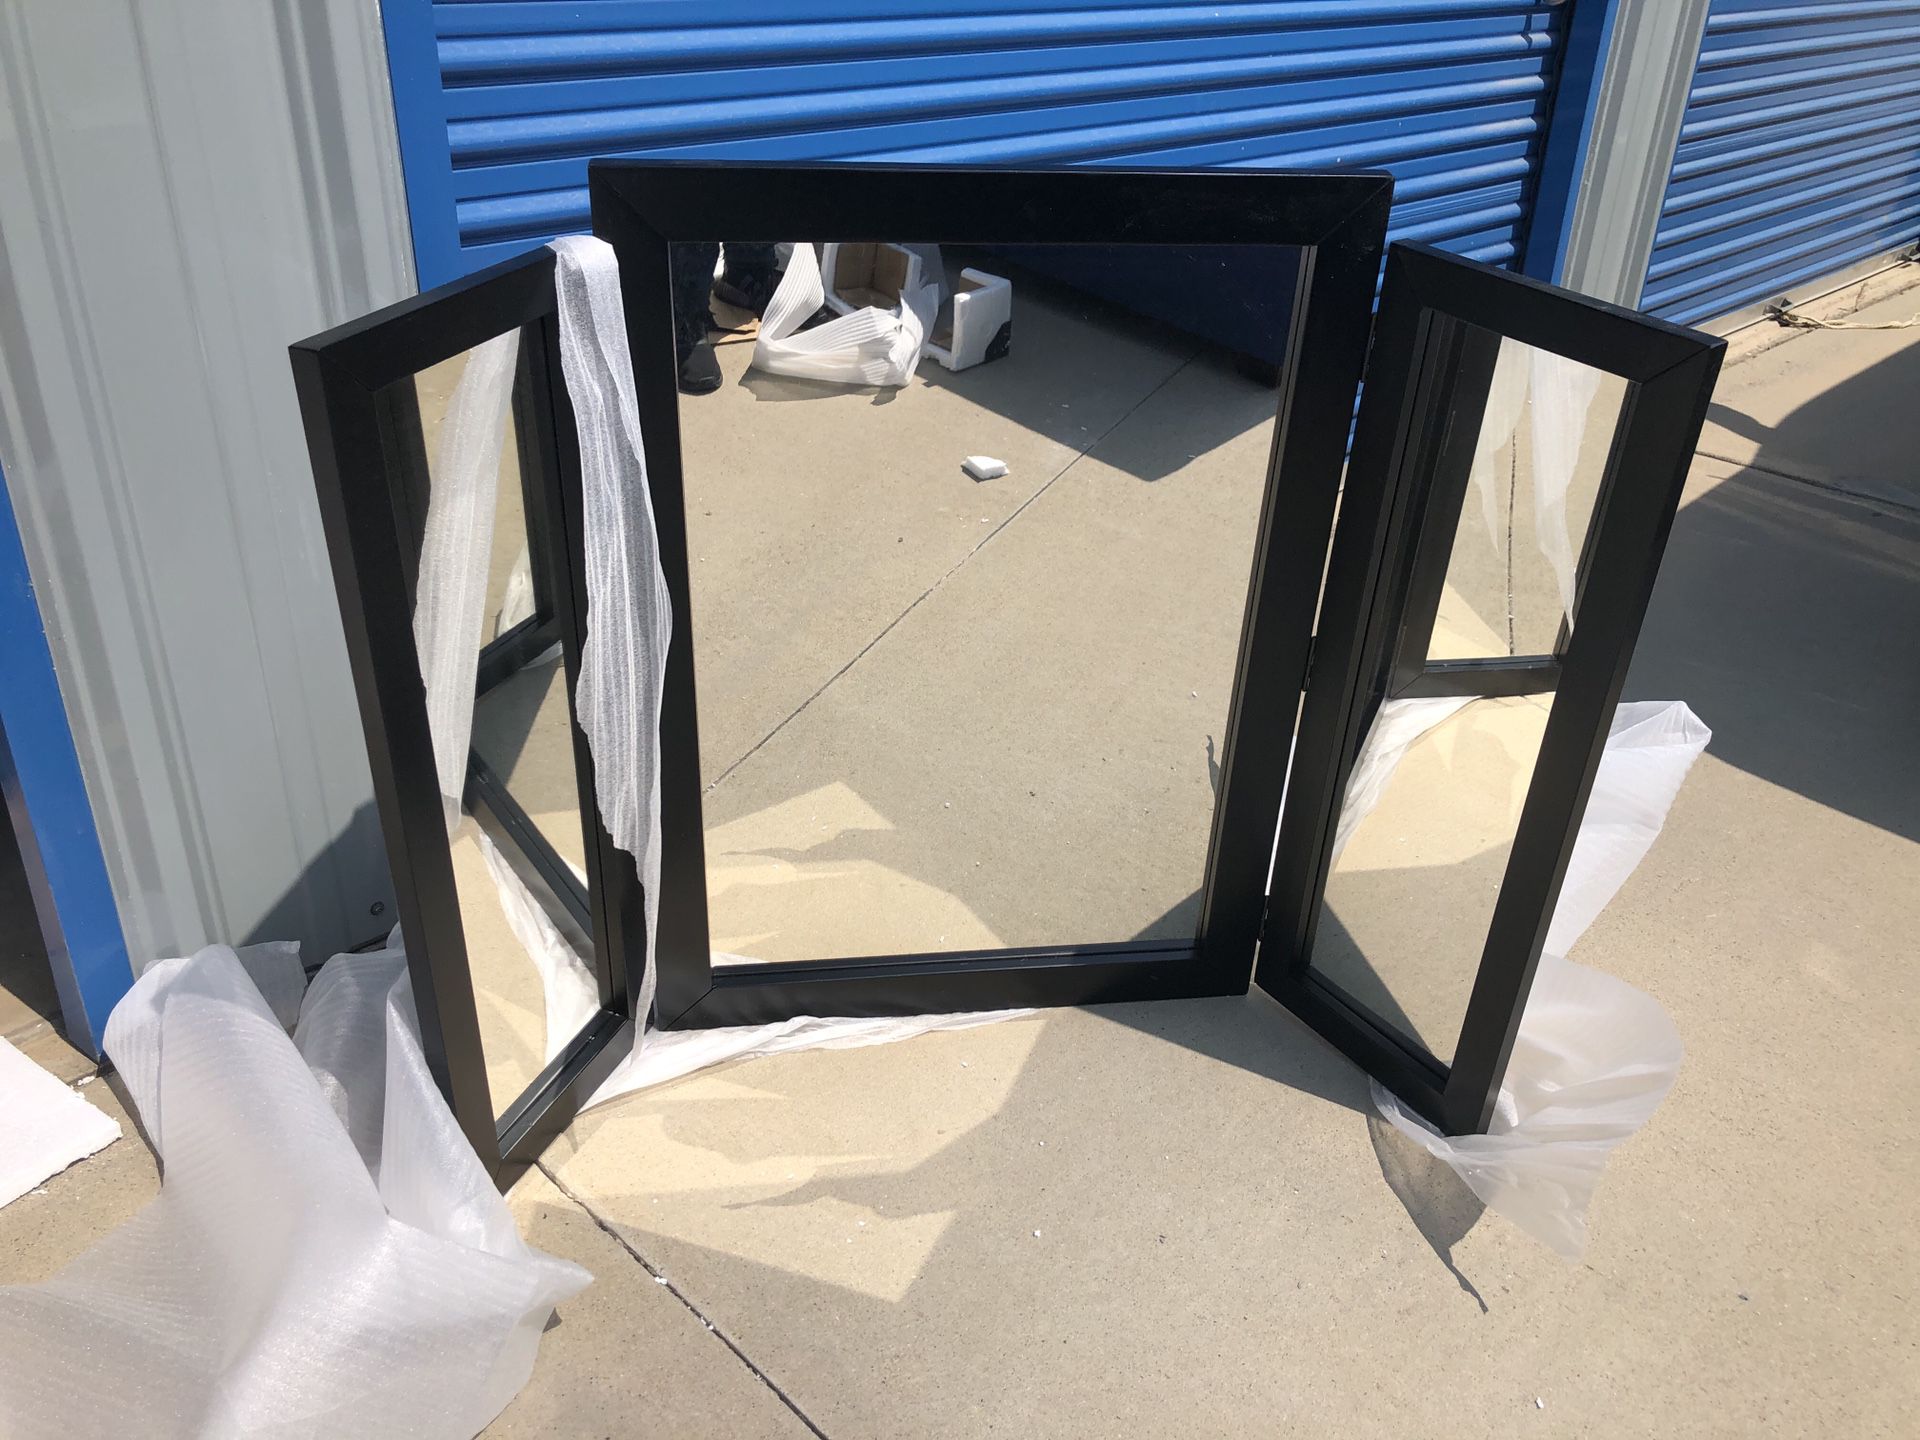 Brand New Vanity Foldable Mirror, Retails For Over $220